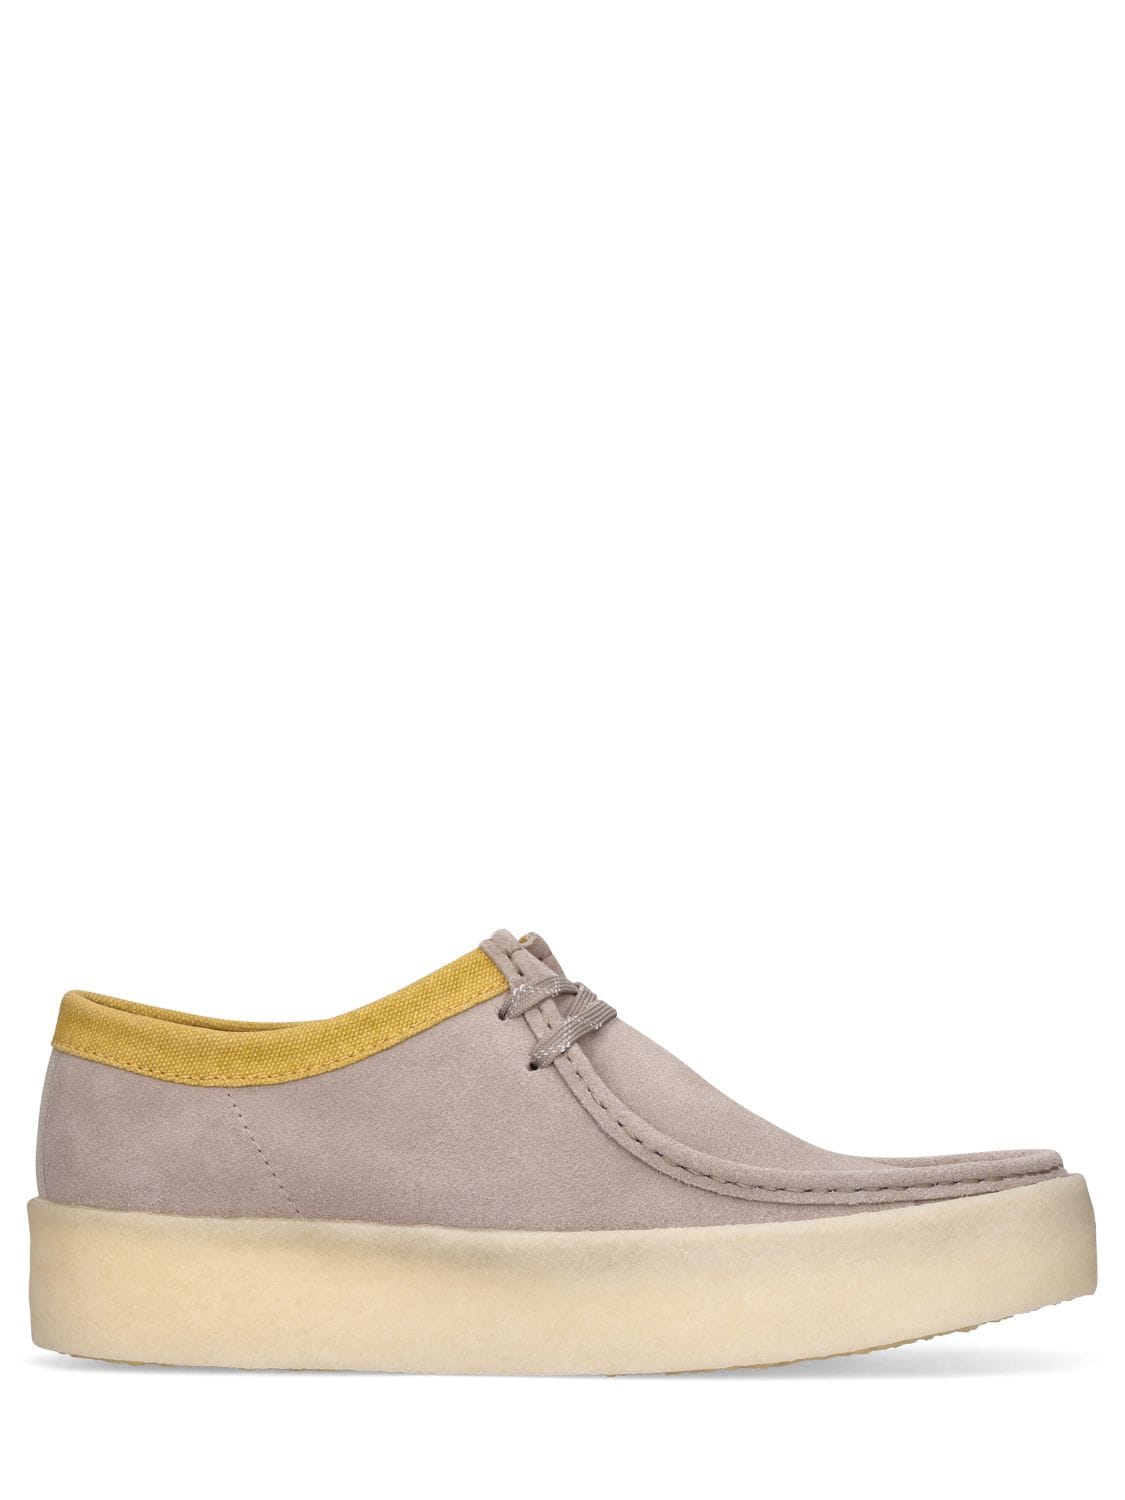 Clarks Originals Wallabe Cup Lace-up Shoes In Stone